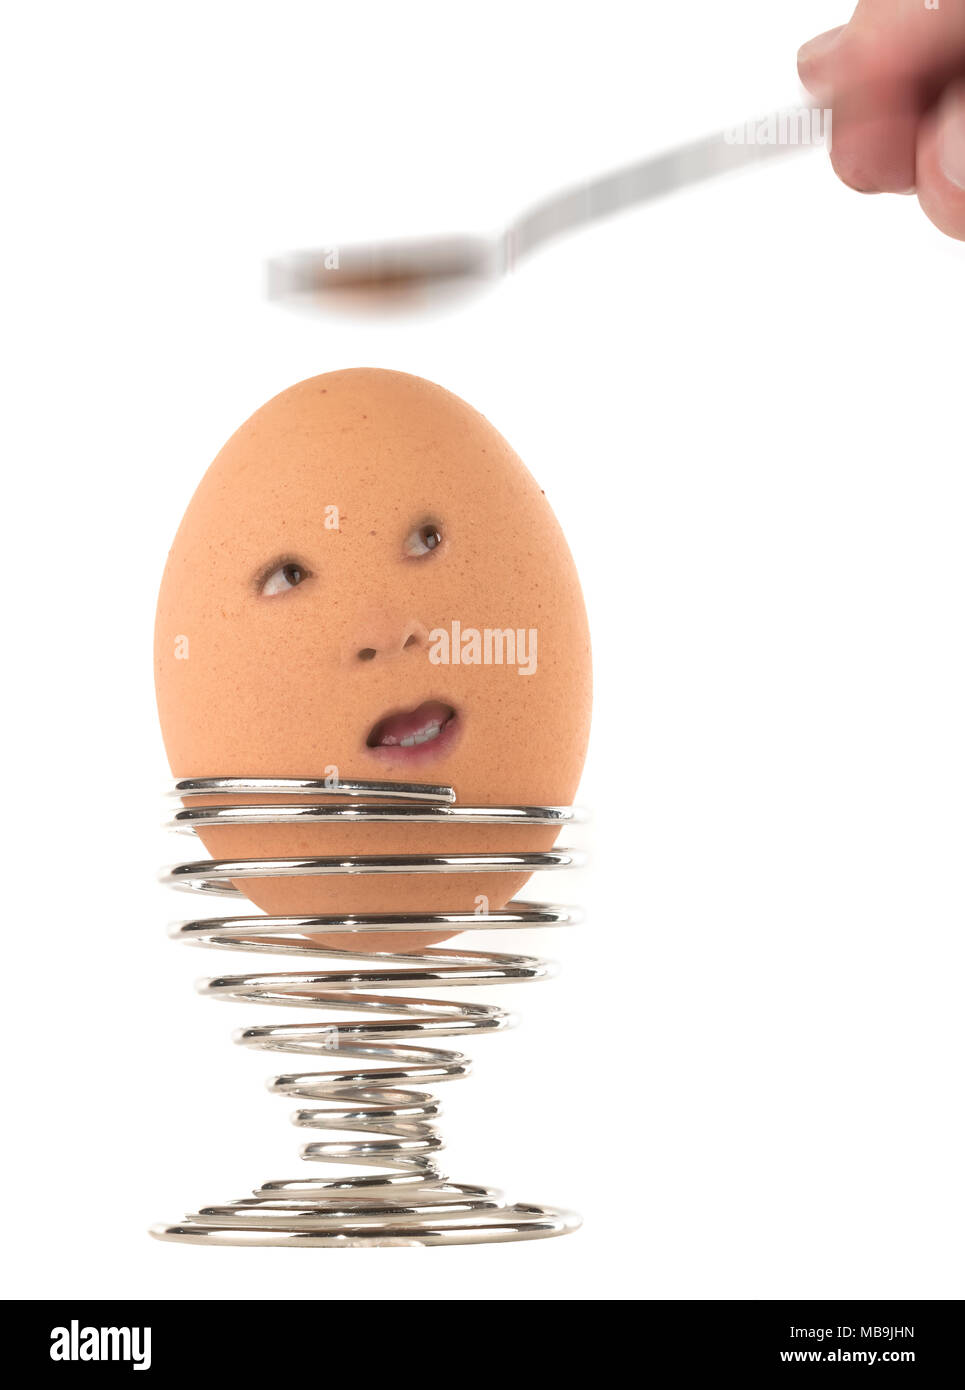 cracking / breaking egg with face with a spoon Stock Photo